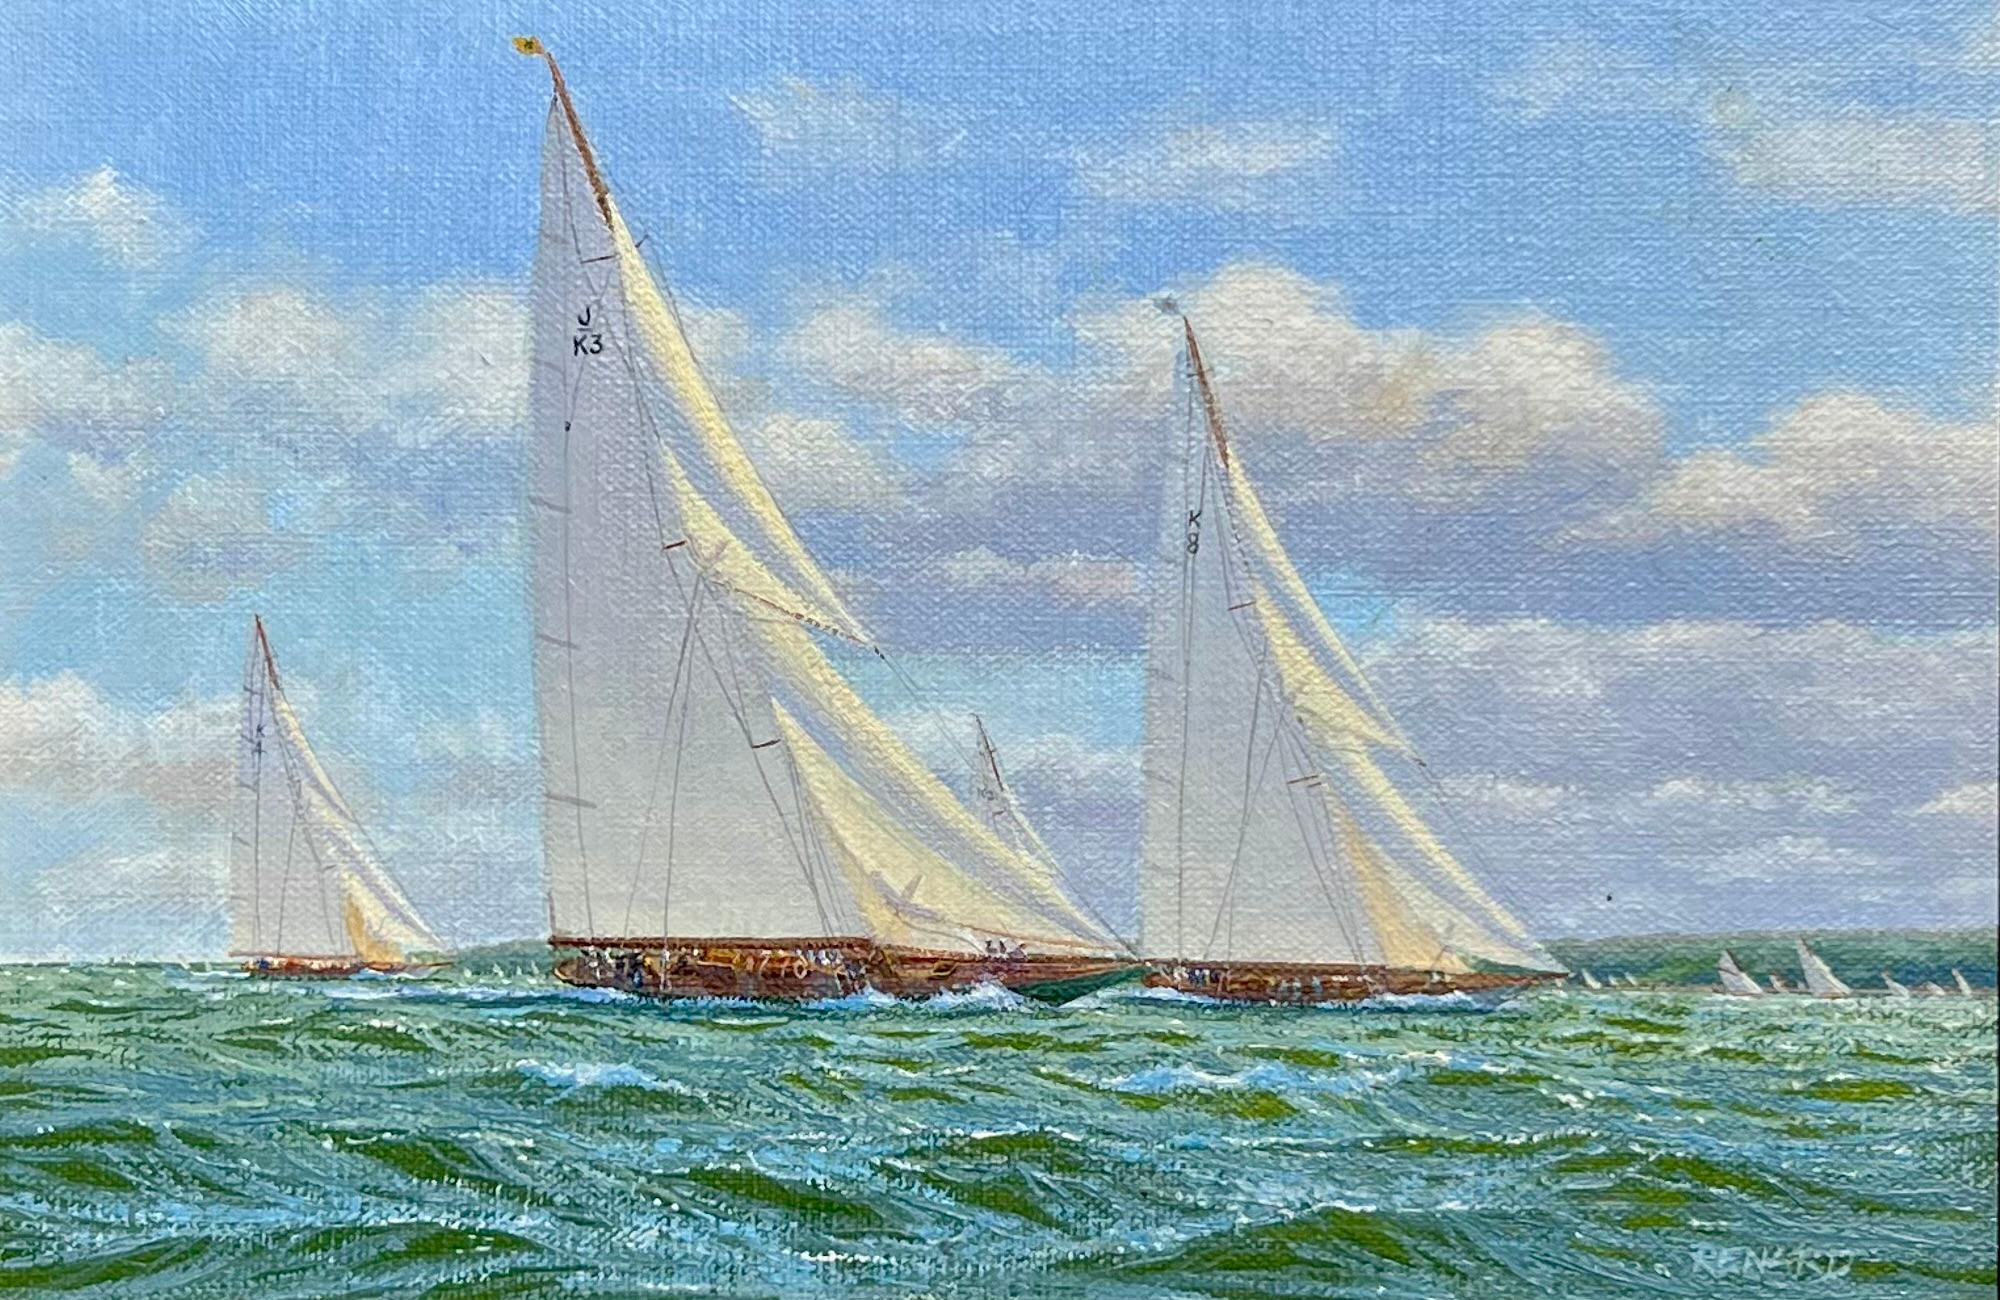 Yachts racing off the English coast.  Oil on artist panel, signed lower right.  

Renard was born in Huddersfield, England in 1947. Although he was interested in art and clearly gifted artistically from an early age, he chose to go to teachers